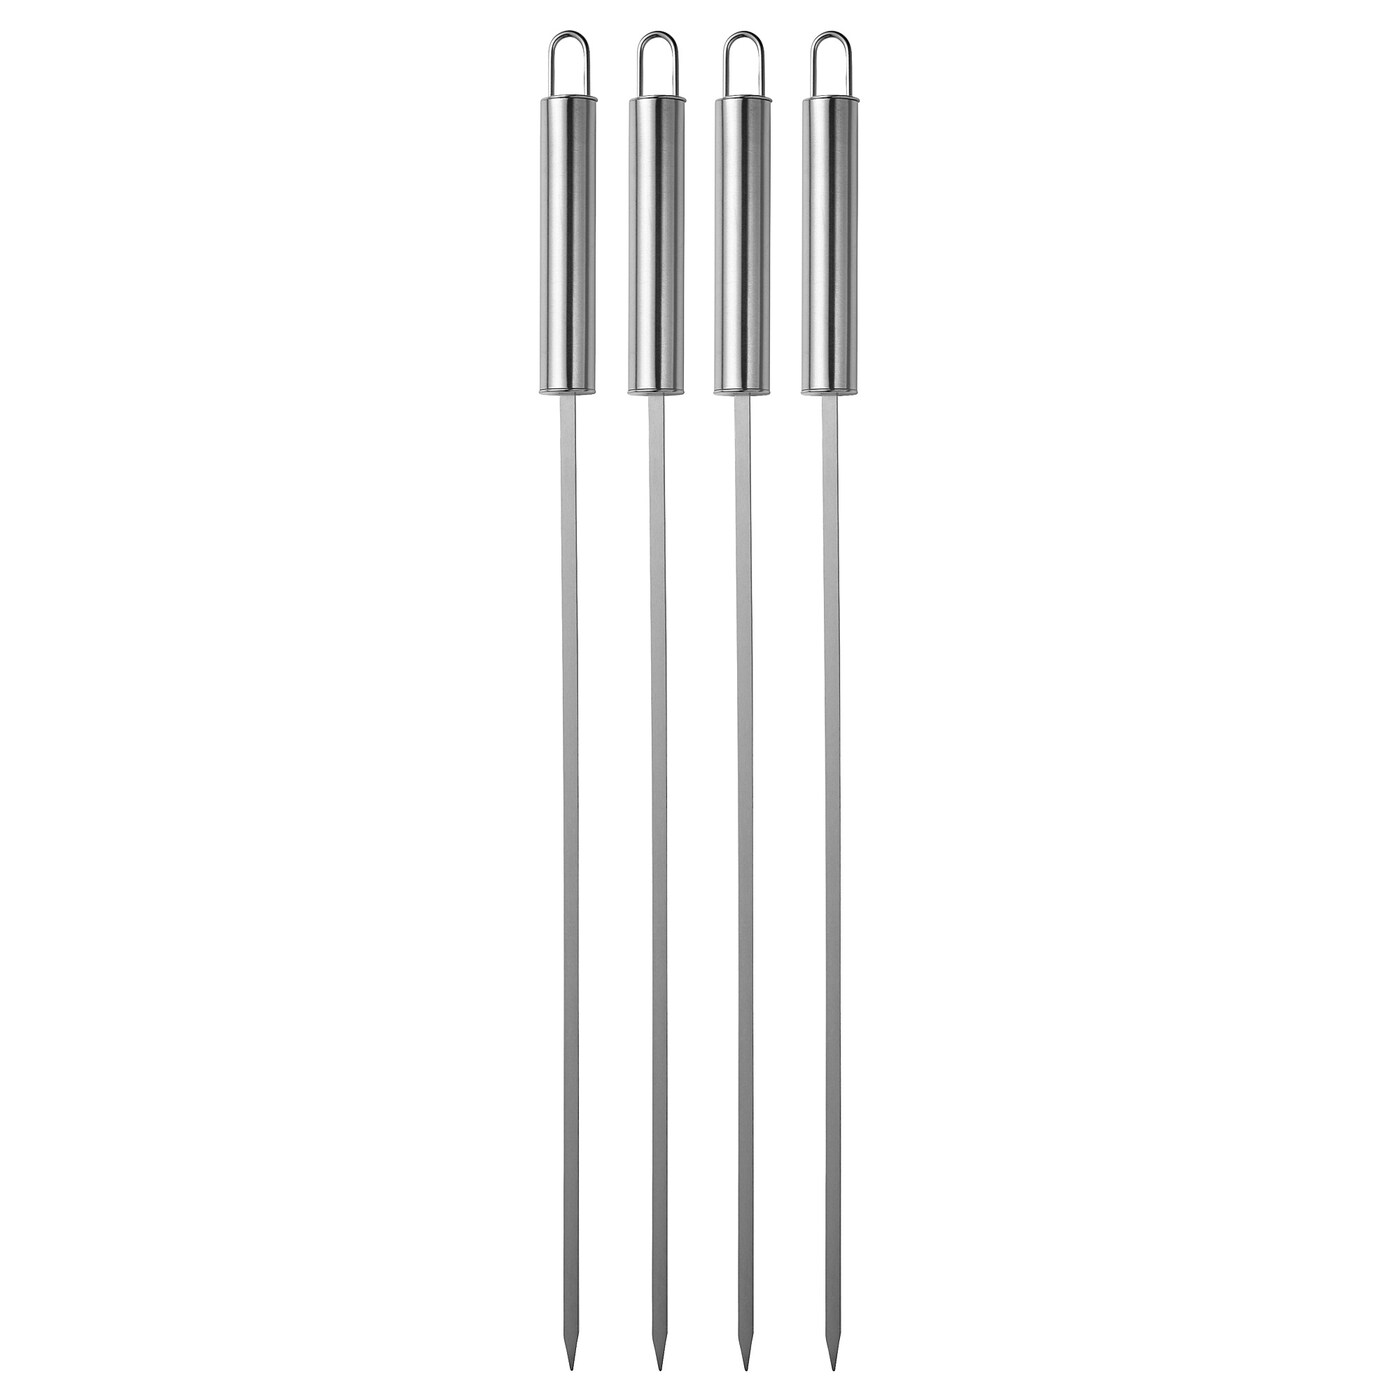 GRILLTIDER 3-piece barbecue tools set, stainless steel - IKEA